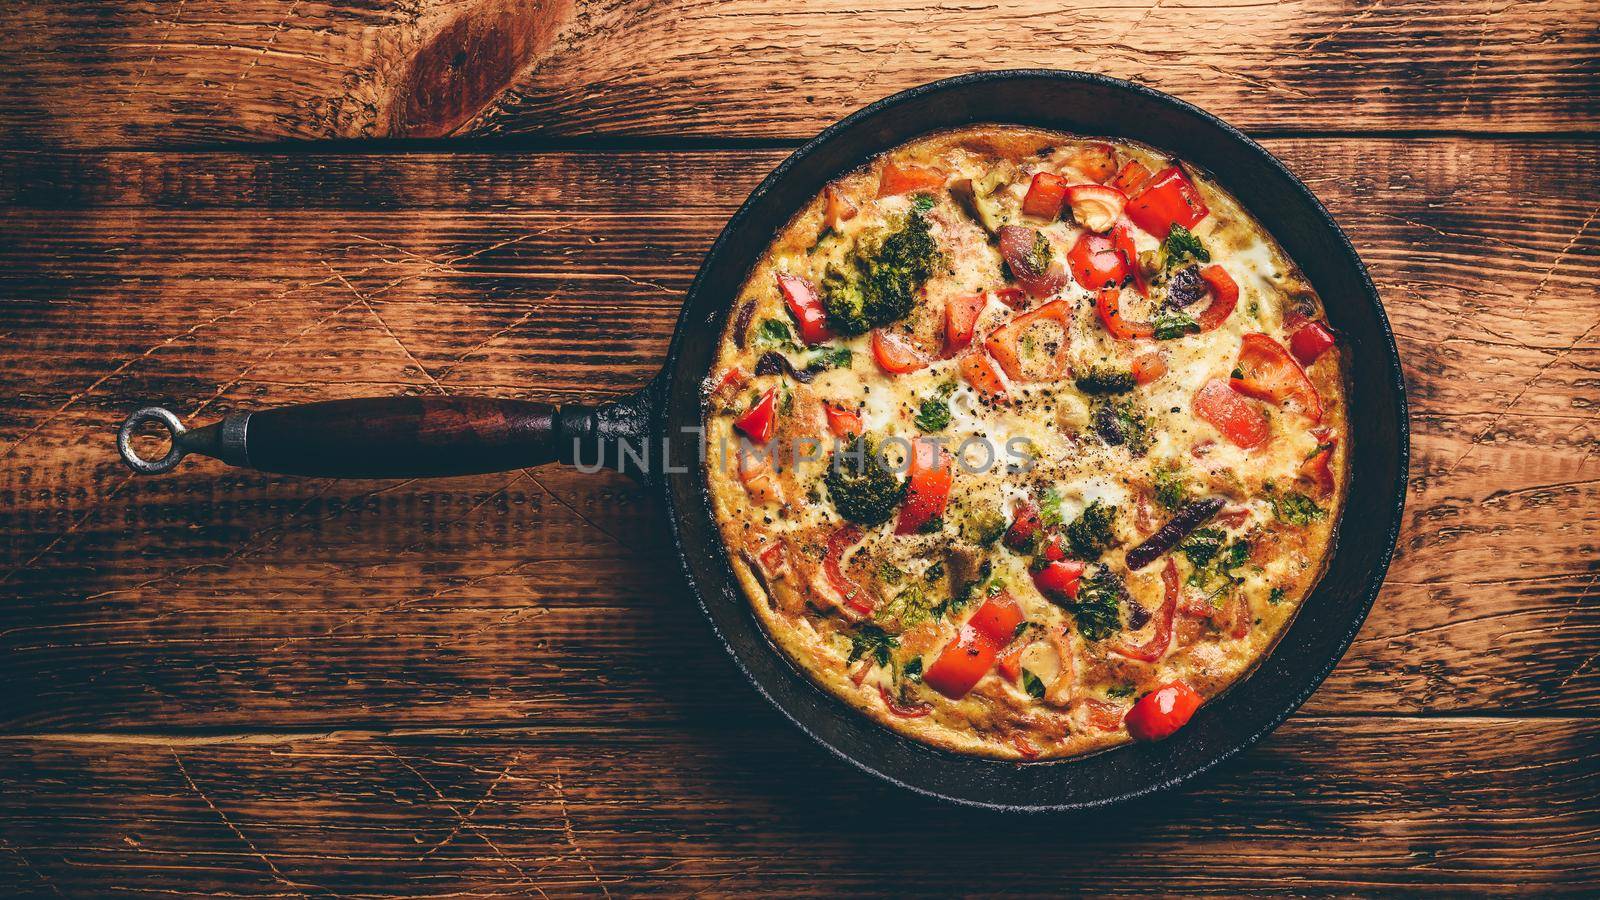 Vegetable frittata with broccoli, red bell pepper and red onion in cast iron skillet. View from above